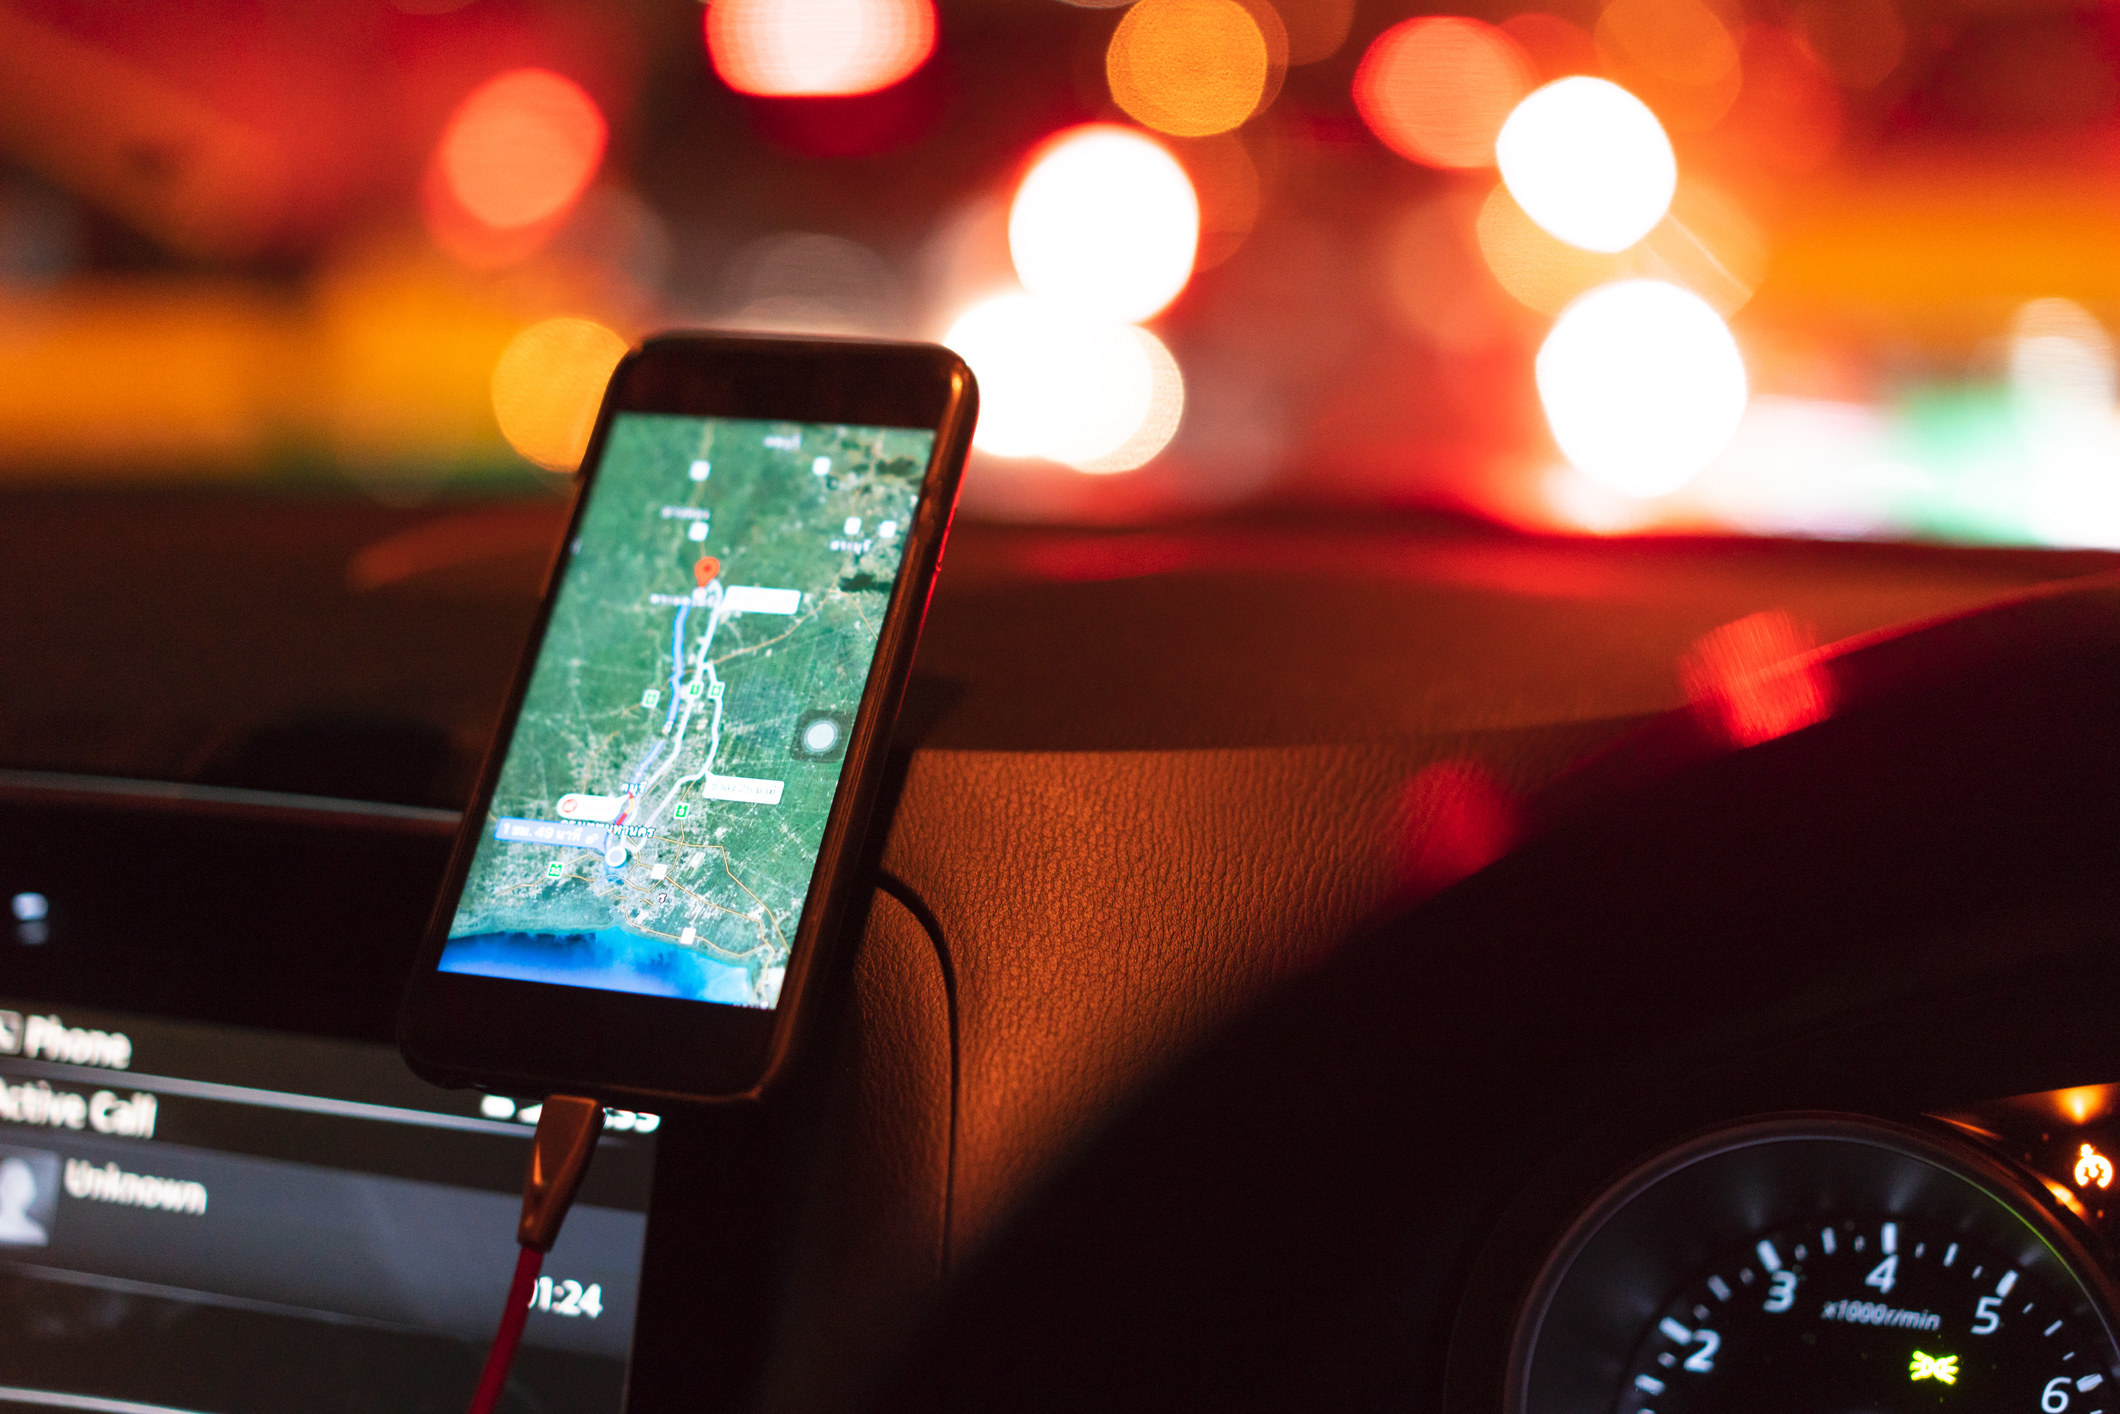 A phone map with directions in a car.